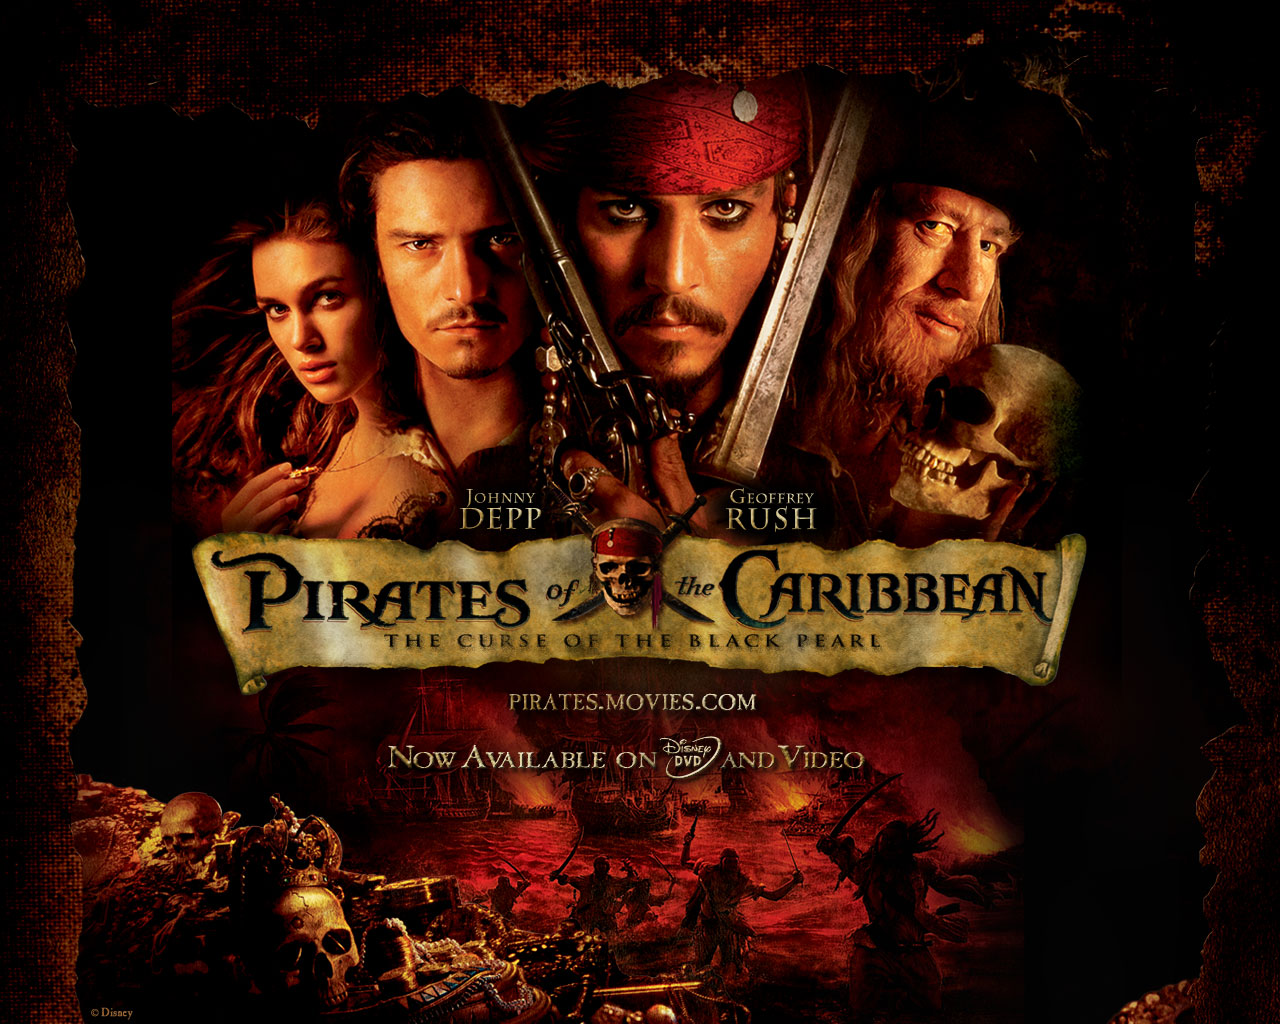 wallpapers jack sparrow, pirates of the caribbean: the curse of the black pearl, movie, blackbeard (pirates of the caribbean), elizabeth swann, geoffrey rush, johnny depp, keira knightley, orlando bloom, will turner